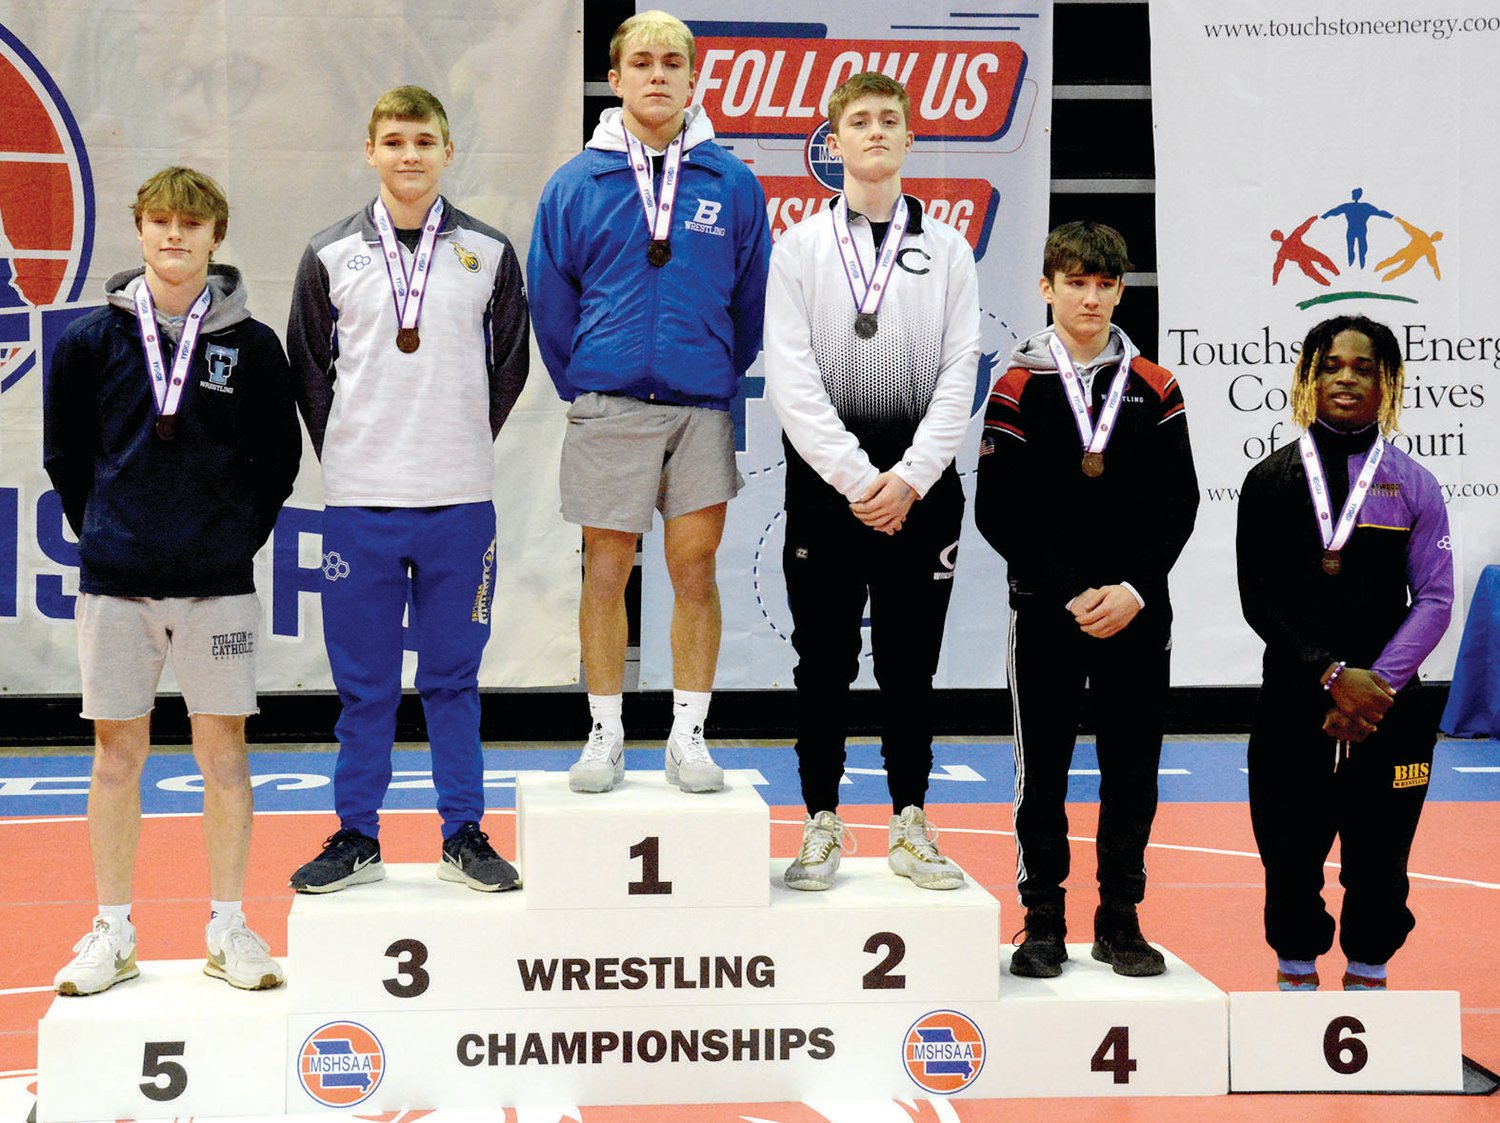 Cody strope, earned third place in his third trip to the Missouri State High School Activities Association (MSHSAA) state wrestling meet in Columbia.